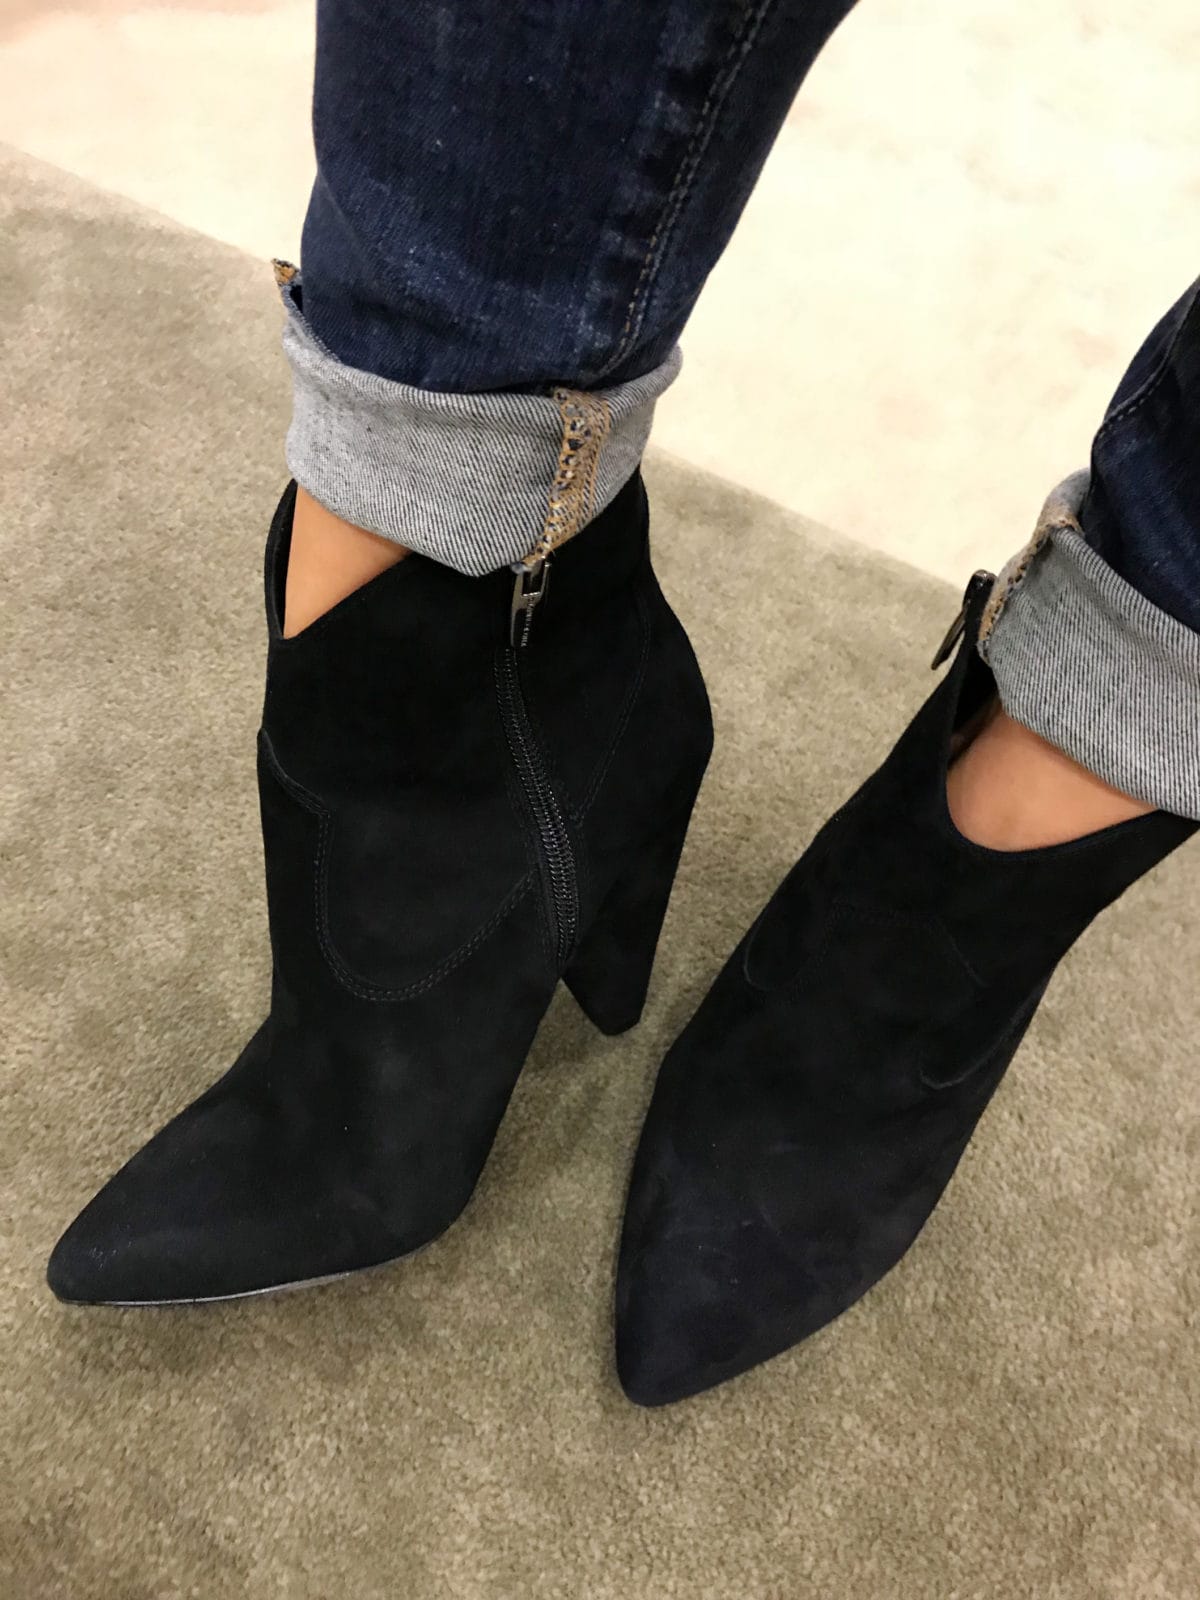 Nordstrom Anniversary Sale last chance vince camuto booties